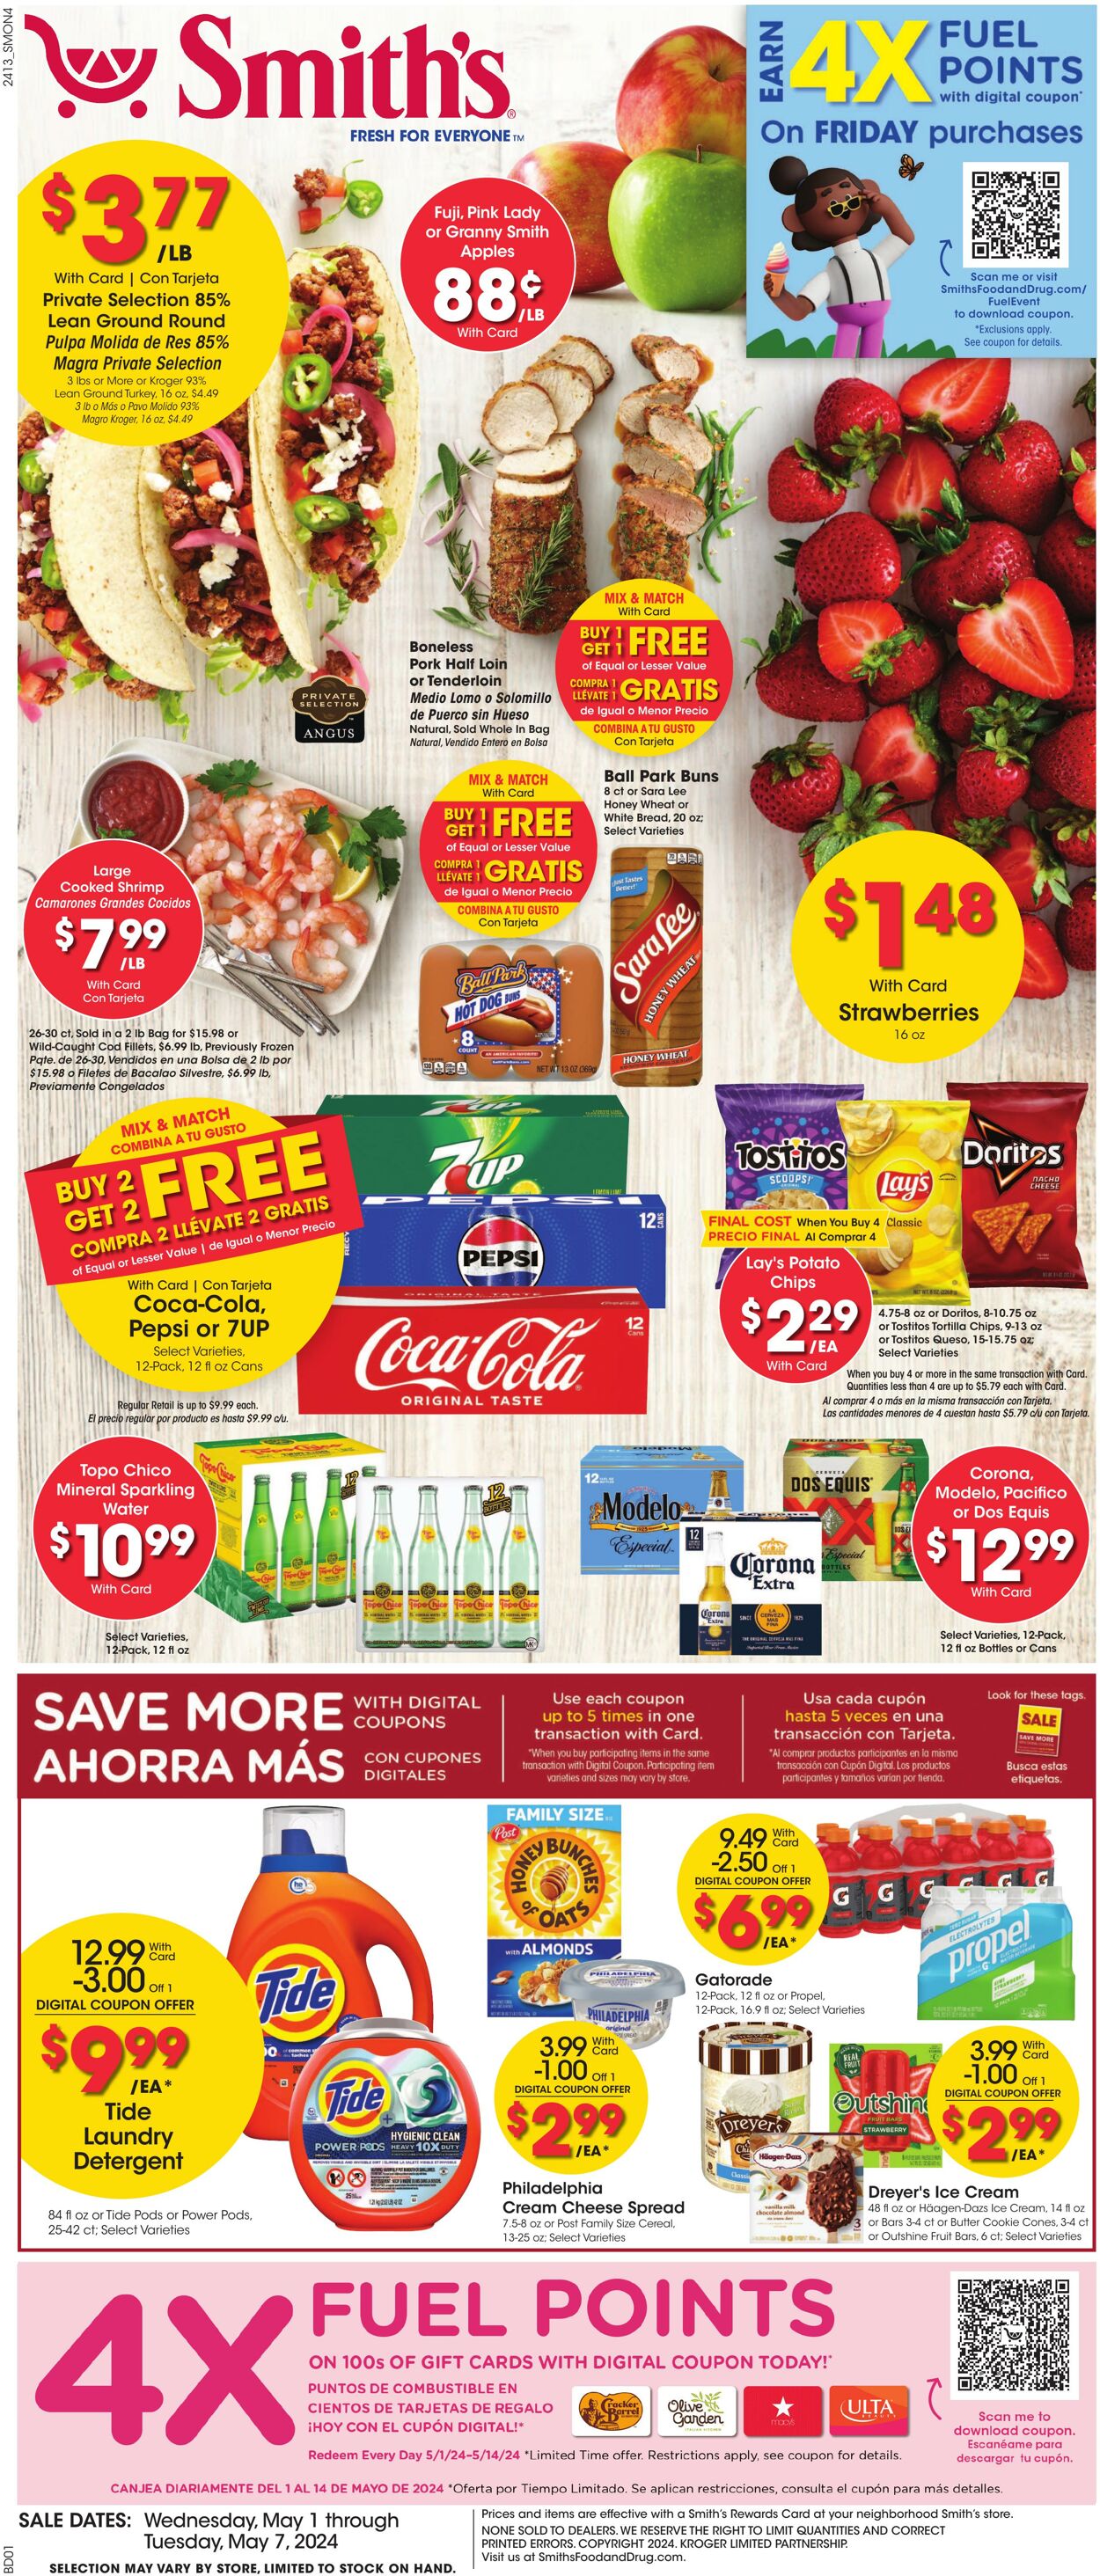 Smith’s Food and Drug Promotional weekly ads